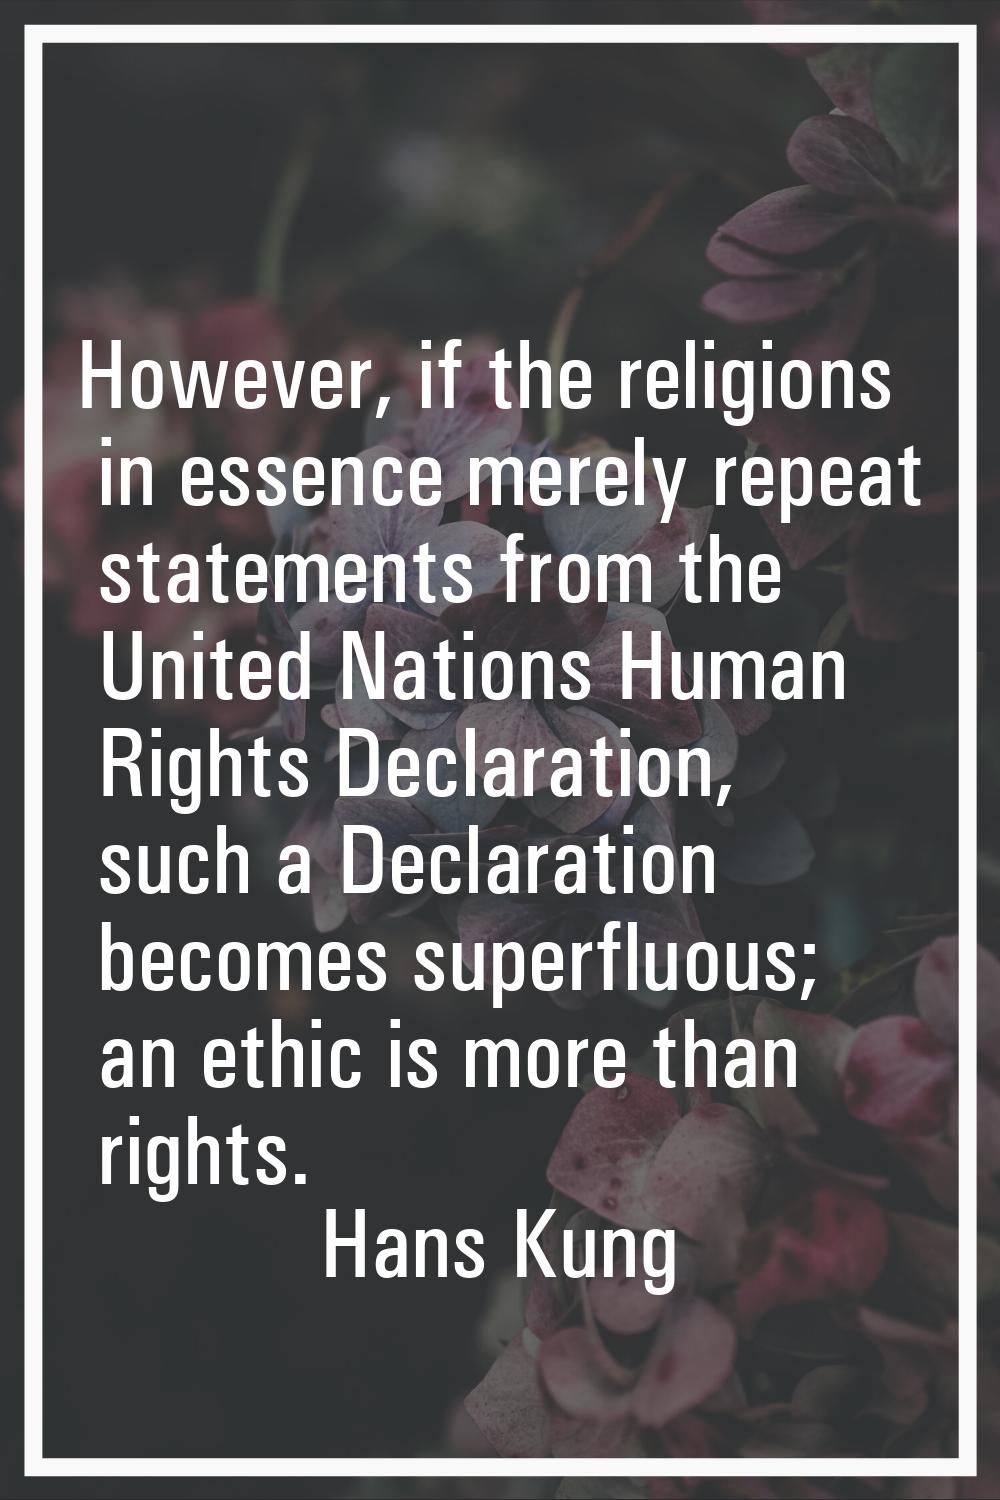 However, if the religions in essence merely repeat statements from the United Nations Human Rights 